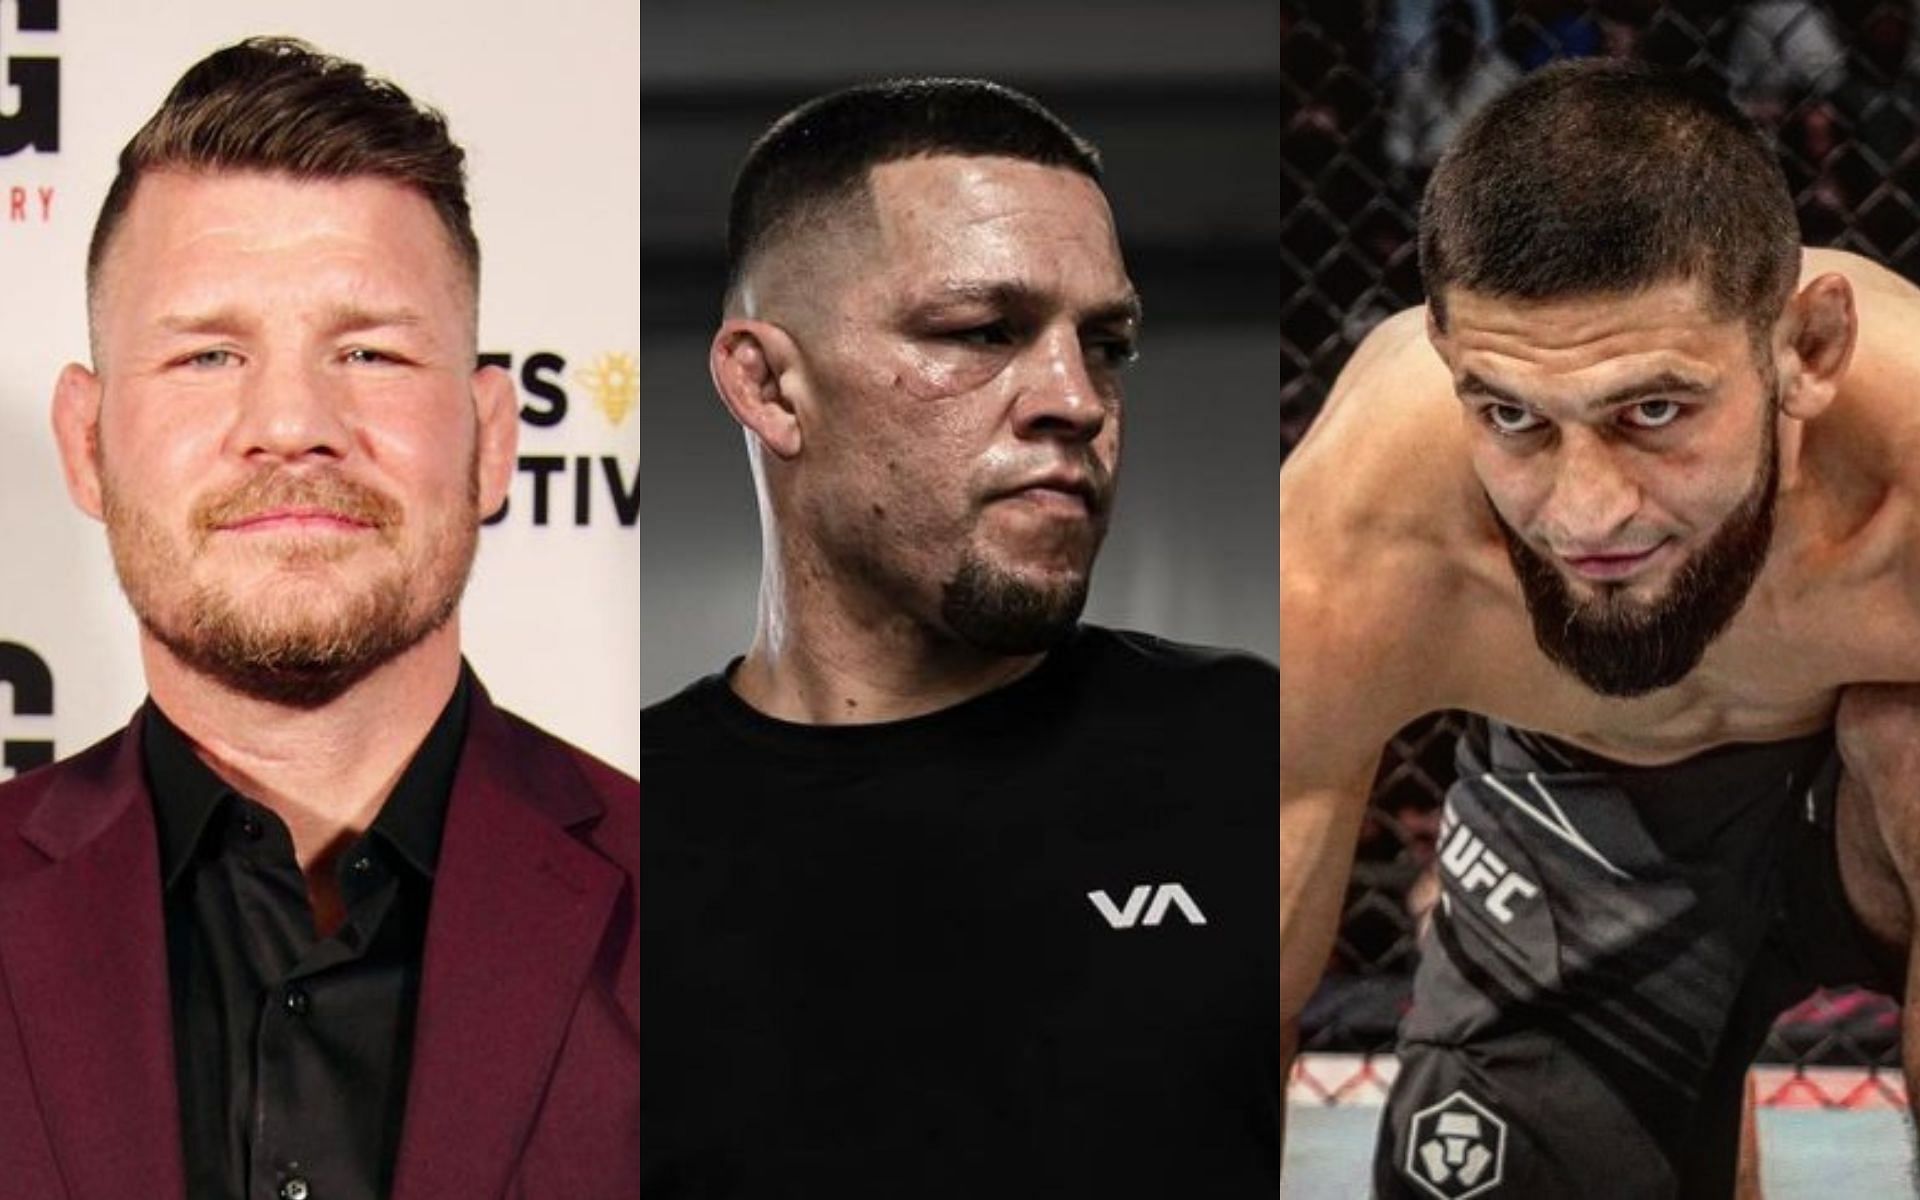 (L to R) Michael Bisping, Nate Diaz and Khamzat Chimaev (via @mikebisping, @natediaz209 and @khamzat_chimaev on Instagram)